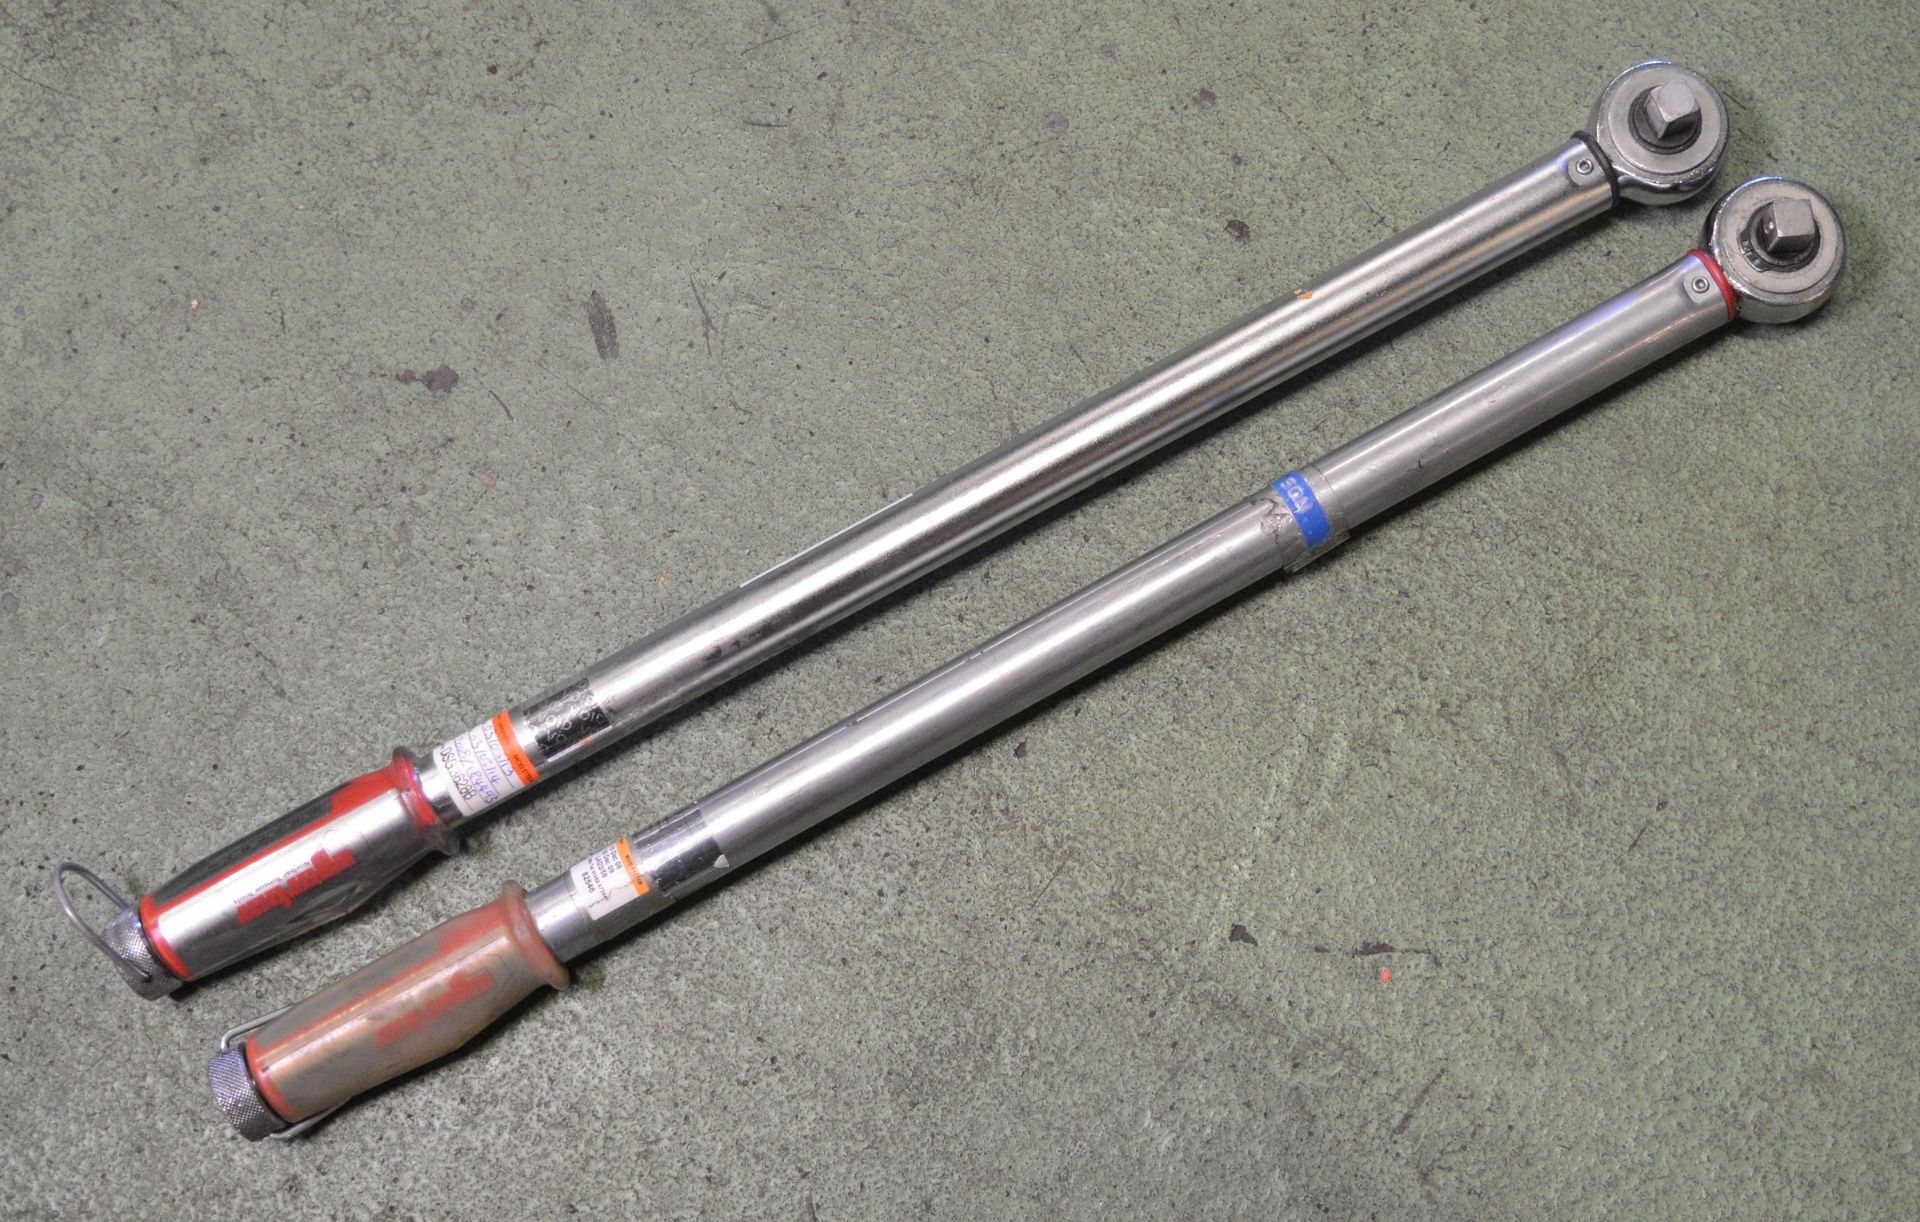 2x Norbar Torque Wrenches